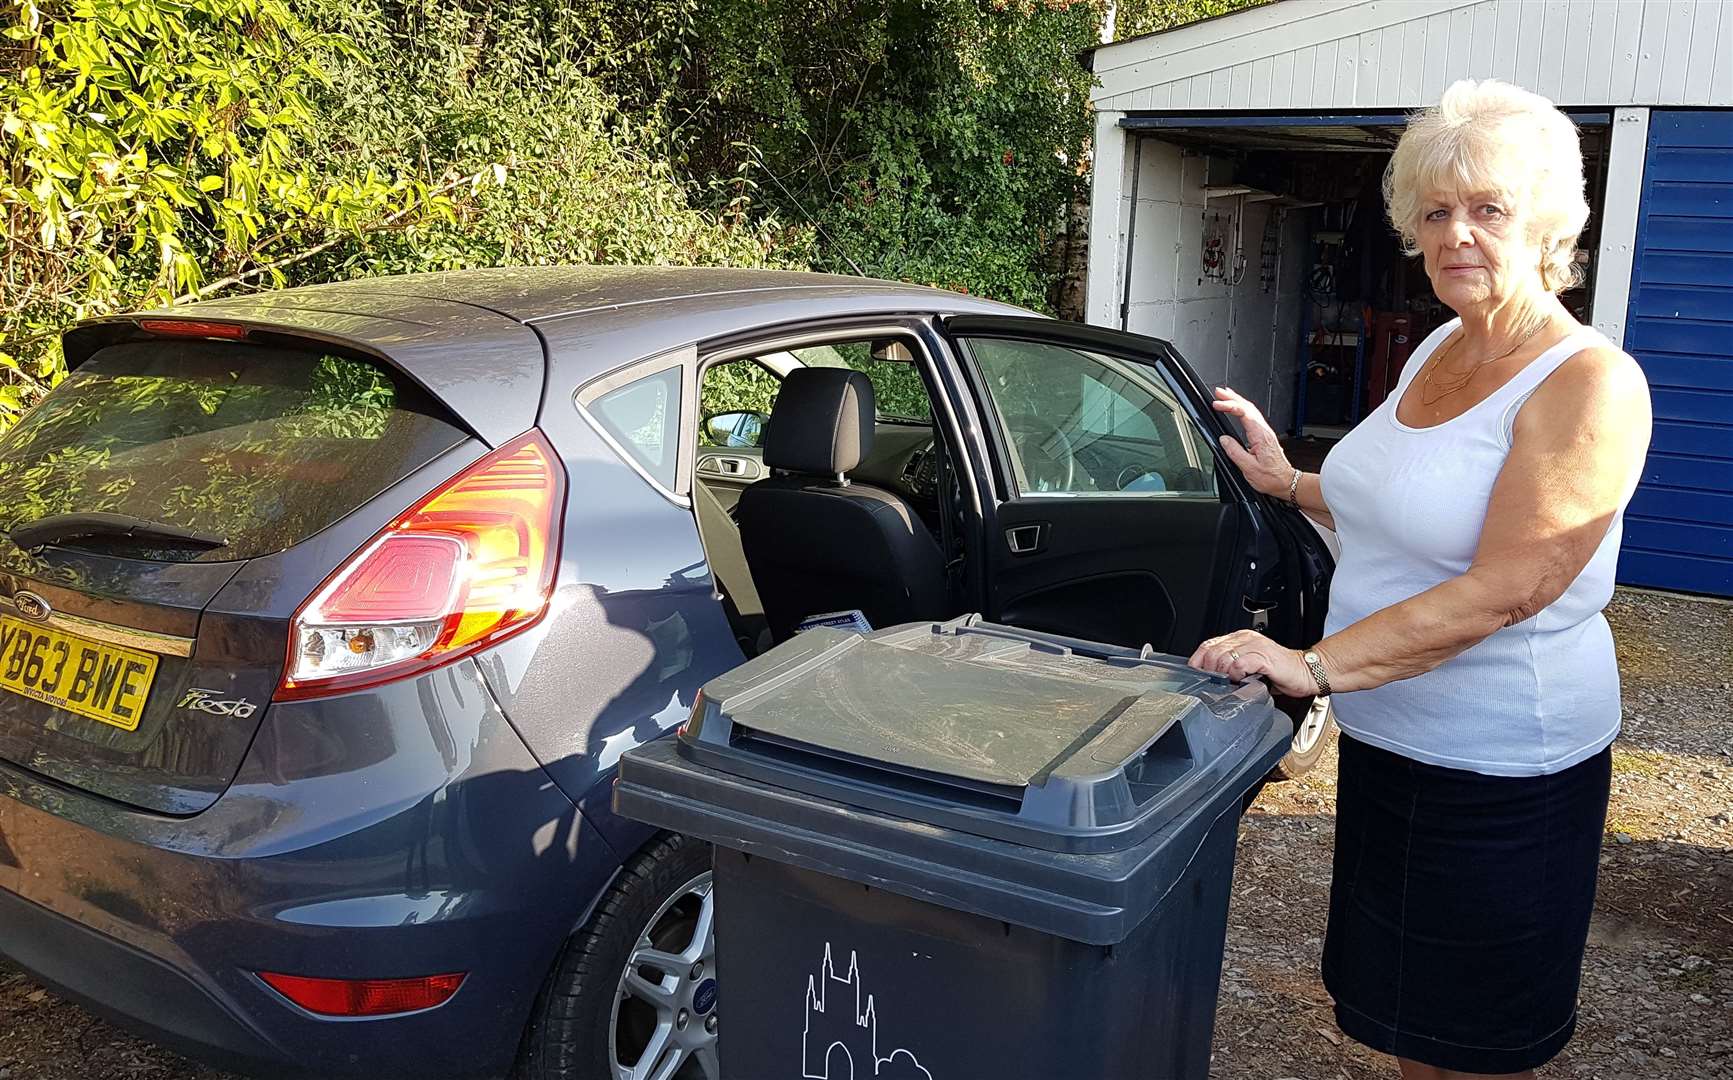 Gill Leith, 72, was told she should pick the wheelie bin up in her Ford Fiesta